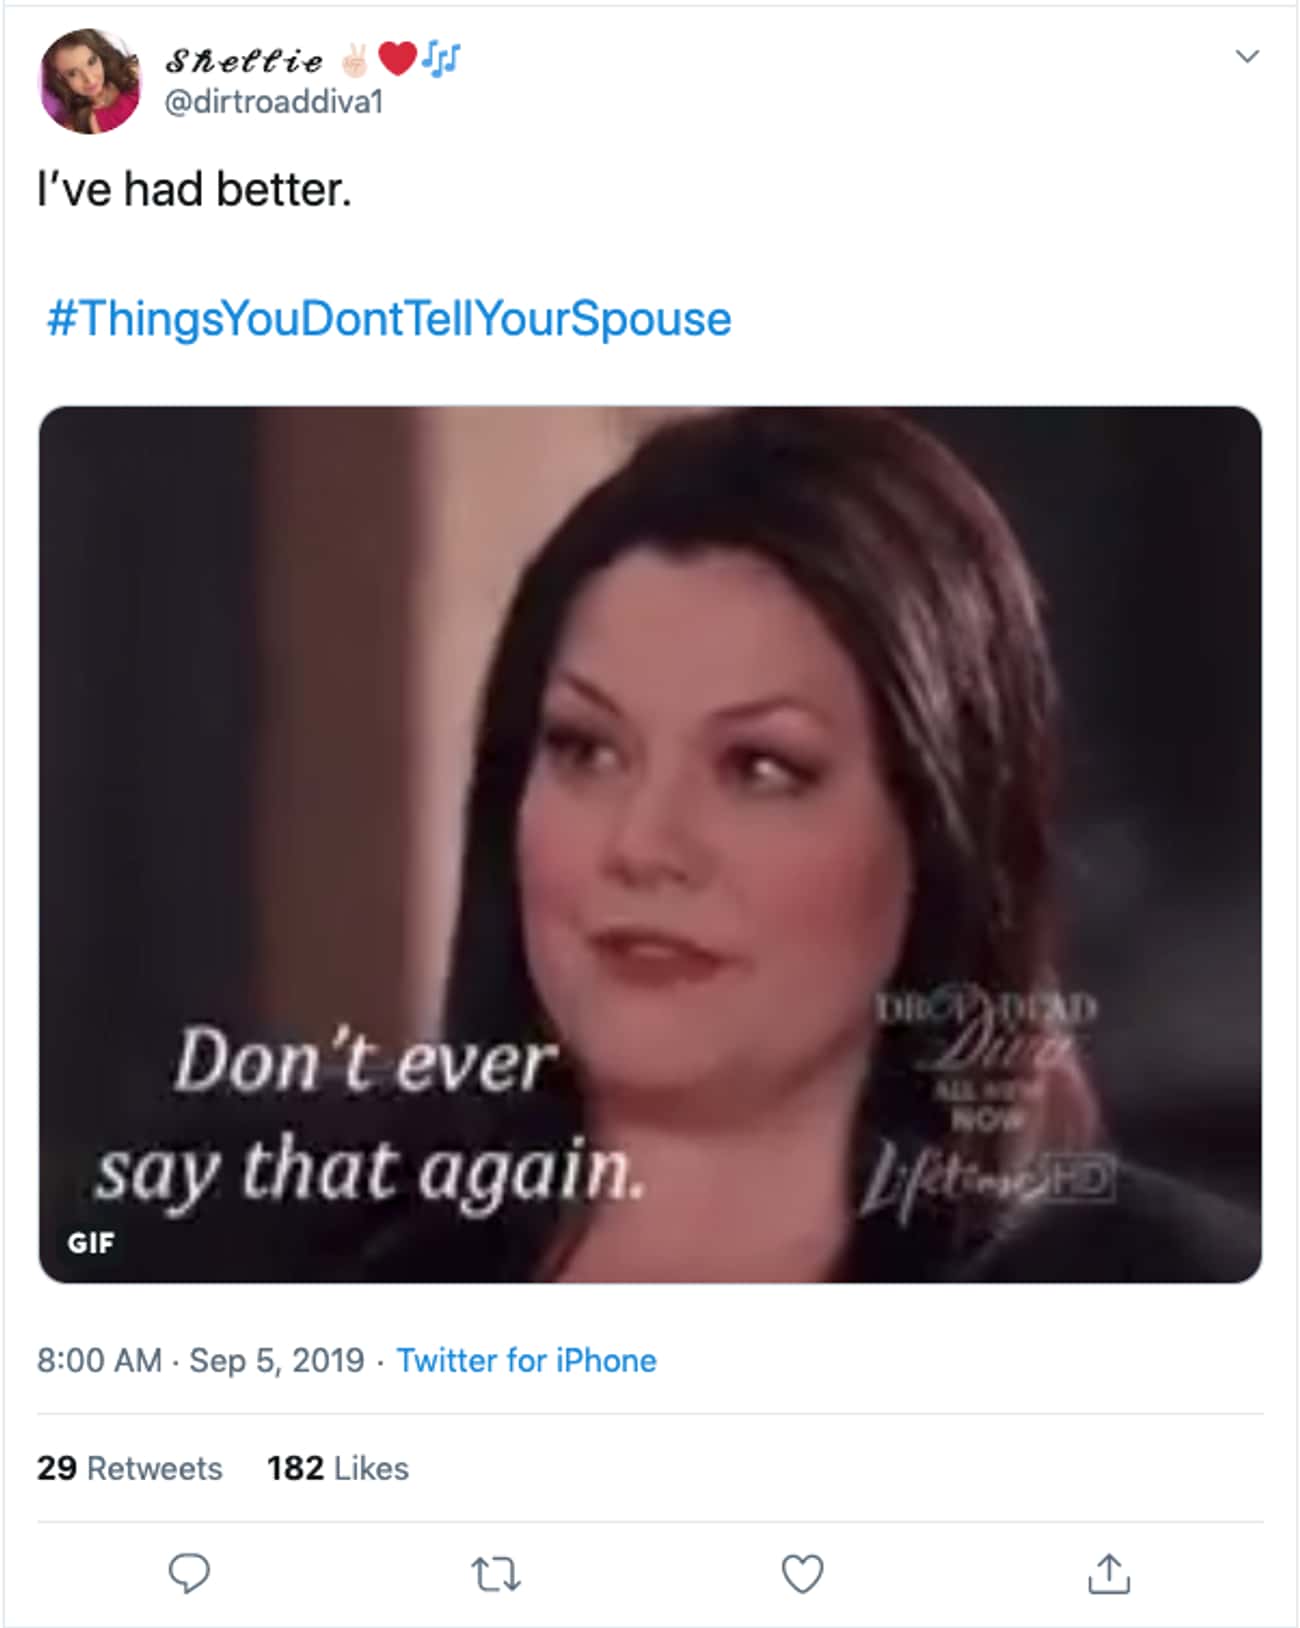 The Best #ThingsYouDon'tTellYourSpouse Tweets We Could Find